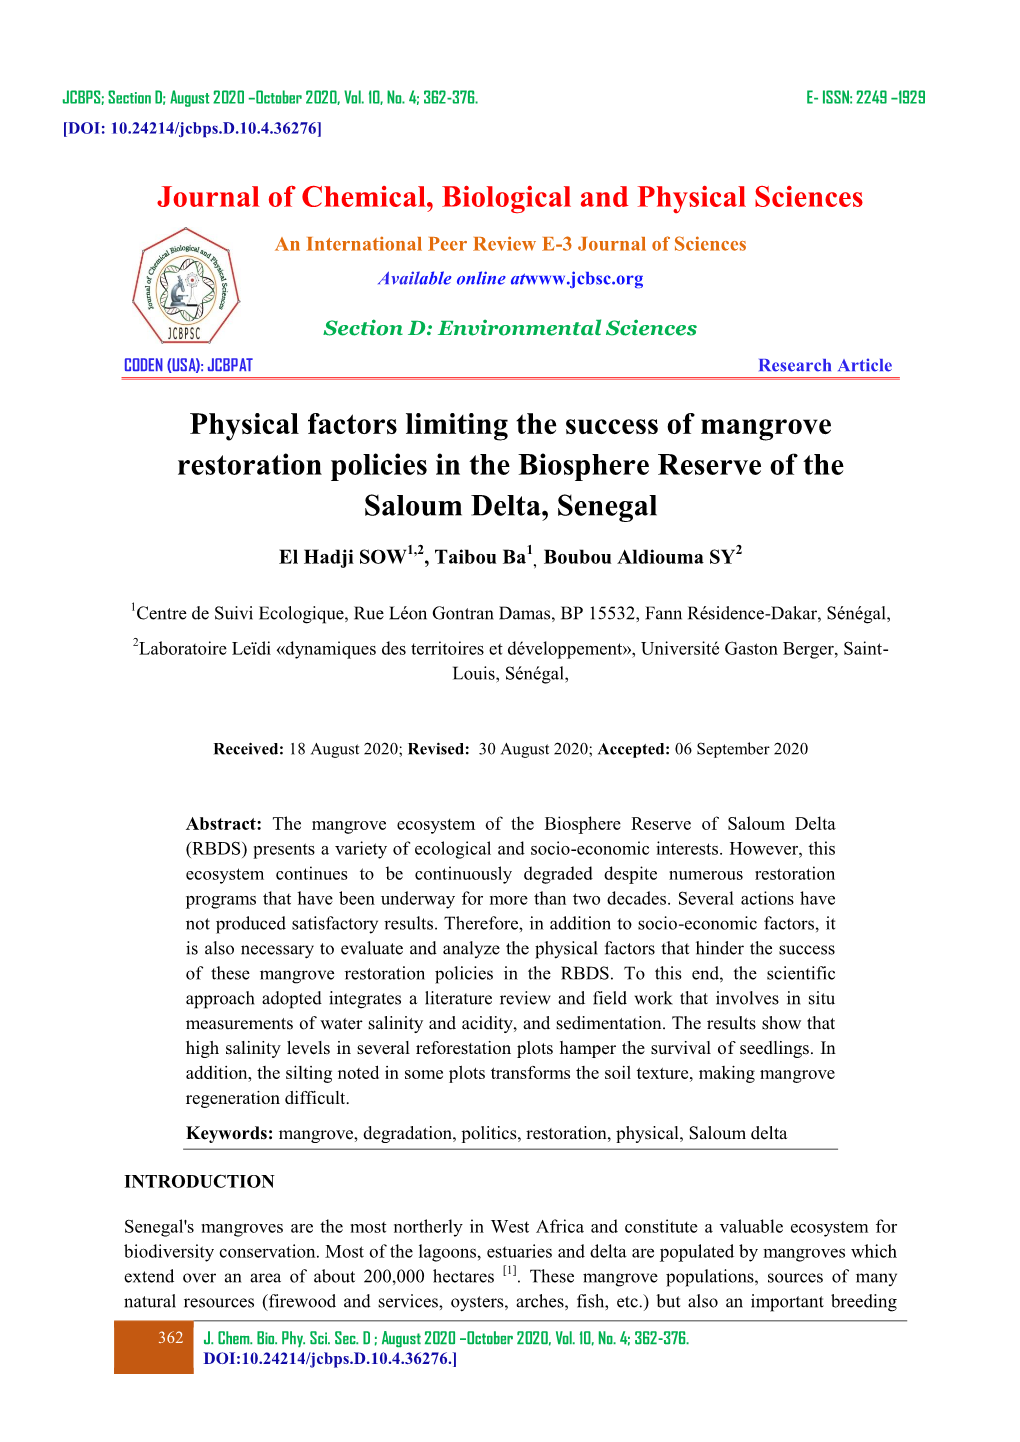 Journal of Chemical, Biological and Physical Sciences Physical Factors